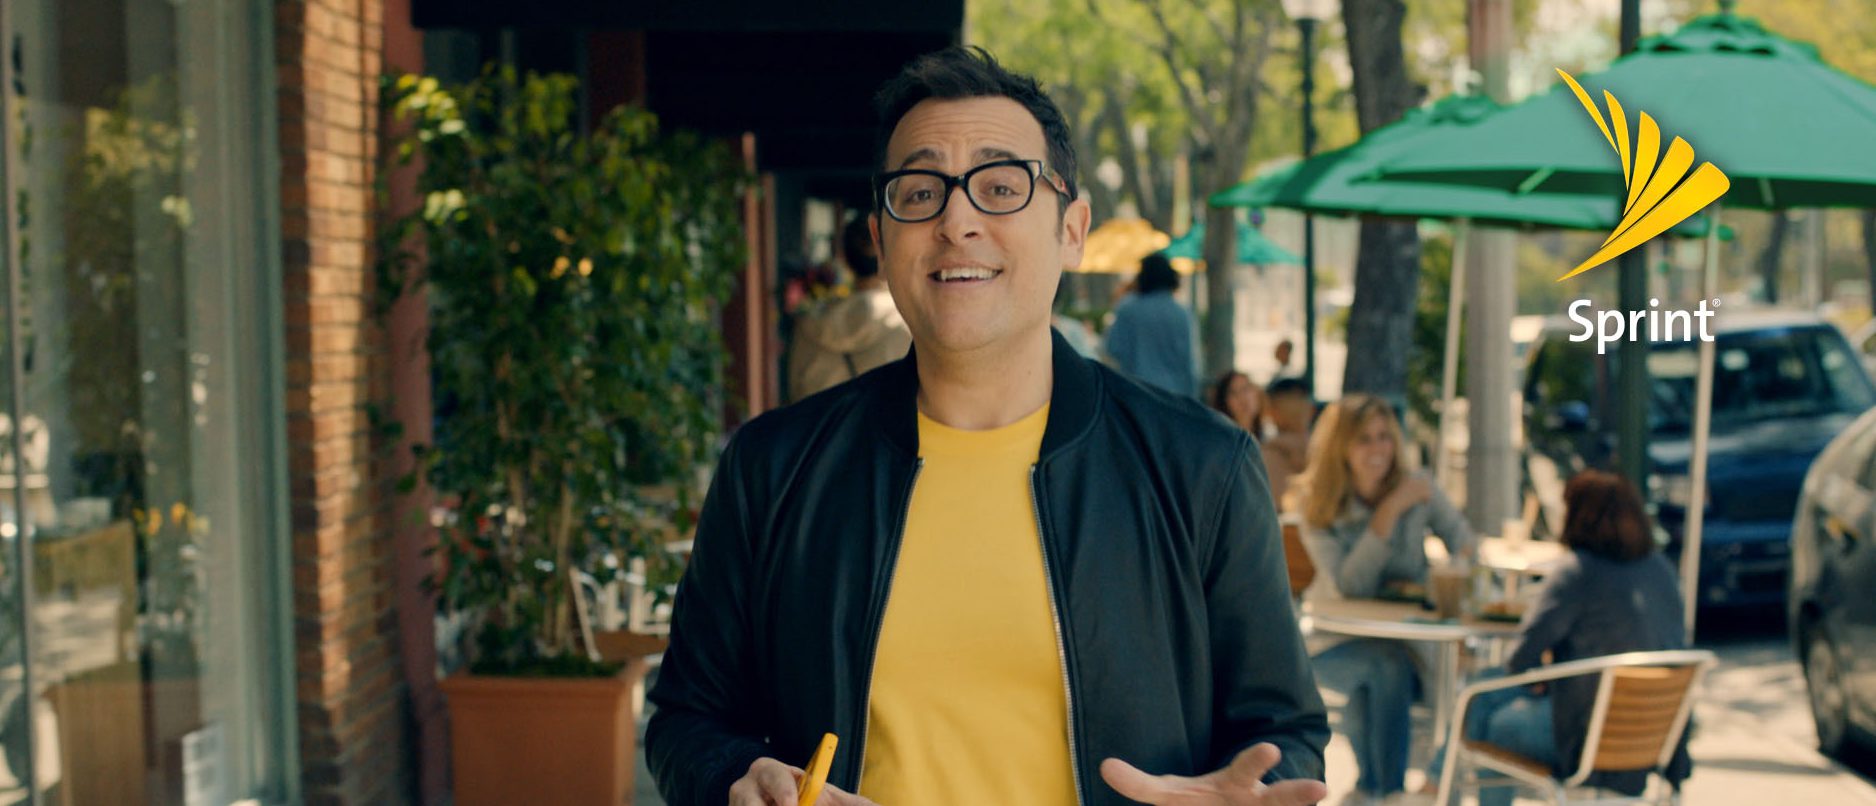 Verizon’s “Can You Hear Me Now?” Guy Now Shilling For Sprint